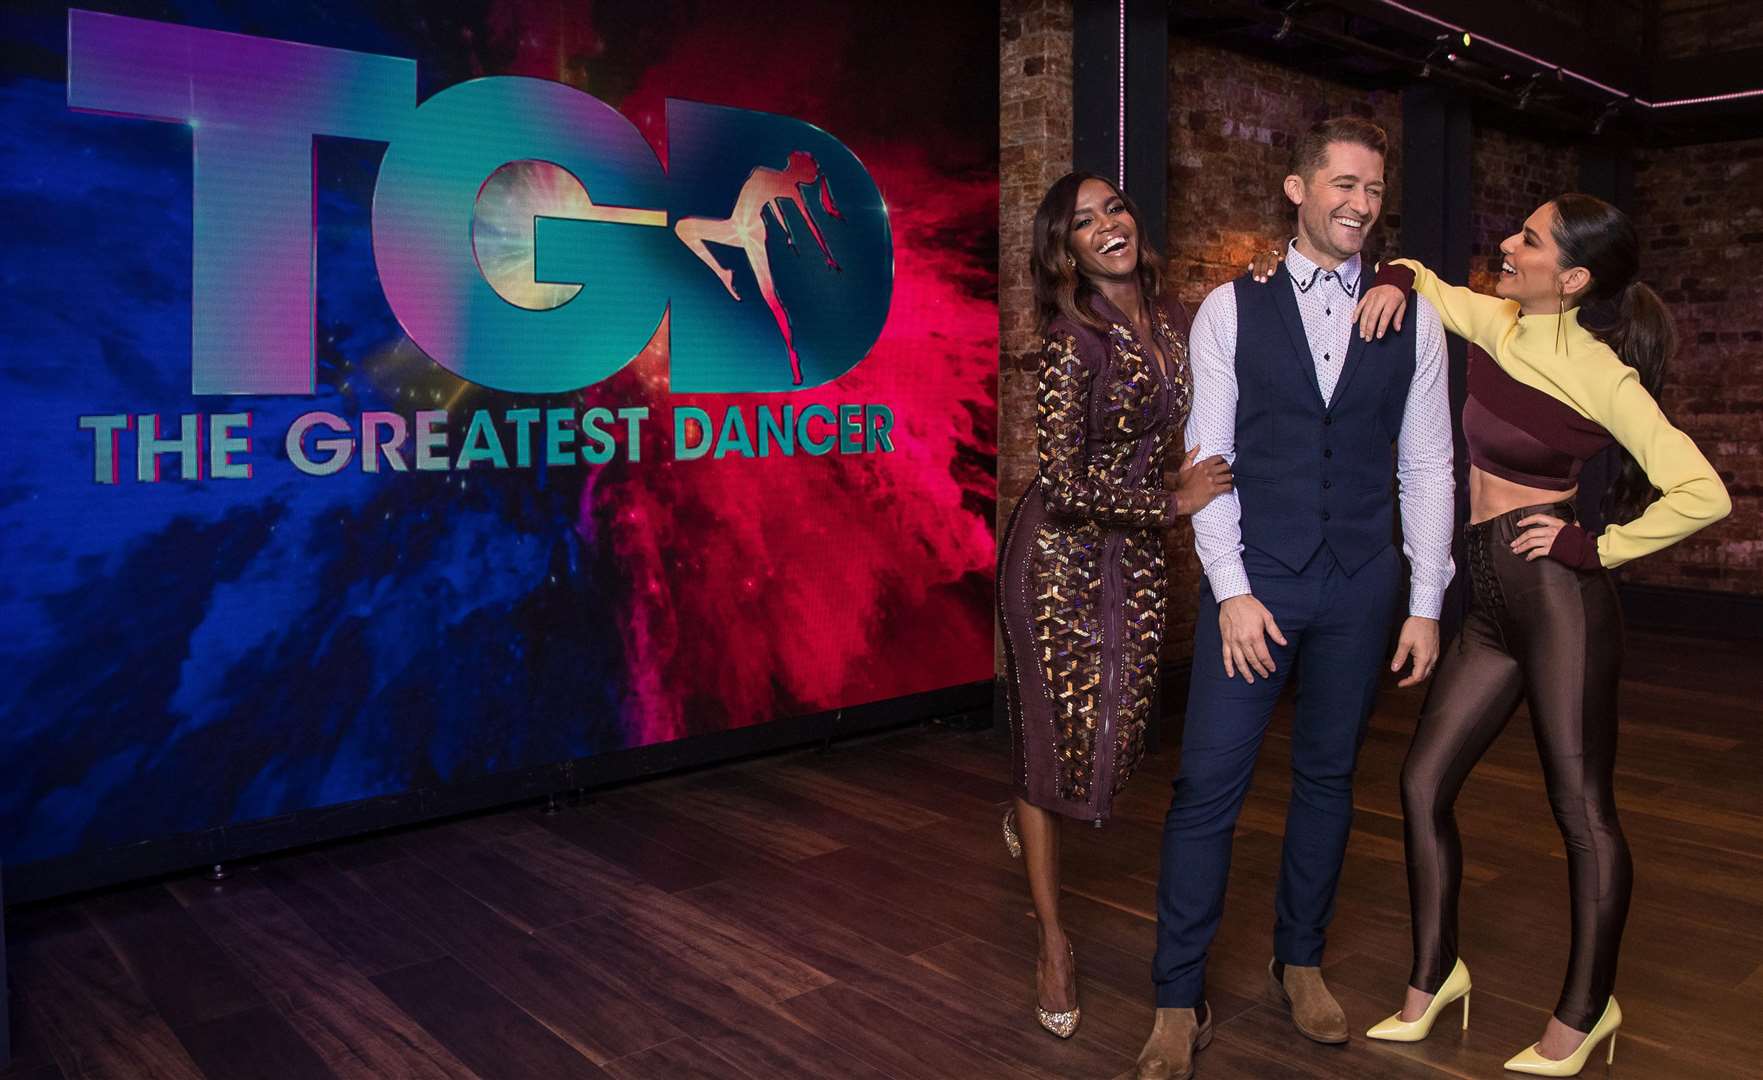 The Greatest Dancer is on BBC One on Saturday nights with judges Oti Mabuse, Matthew Morrison and Cheryl